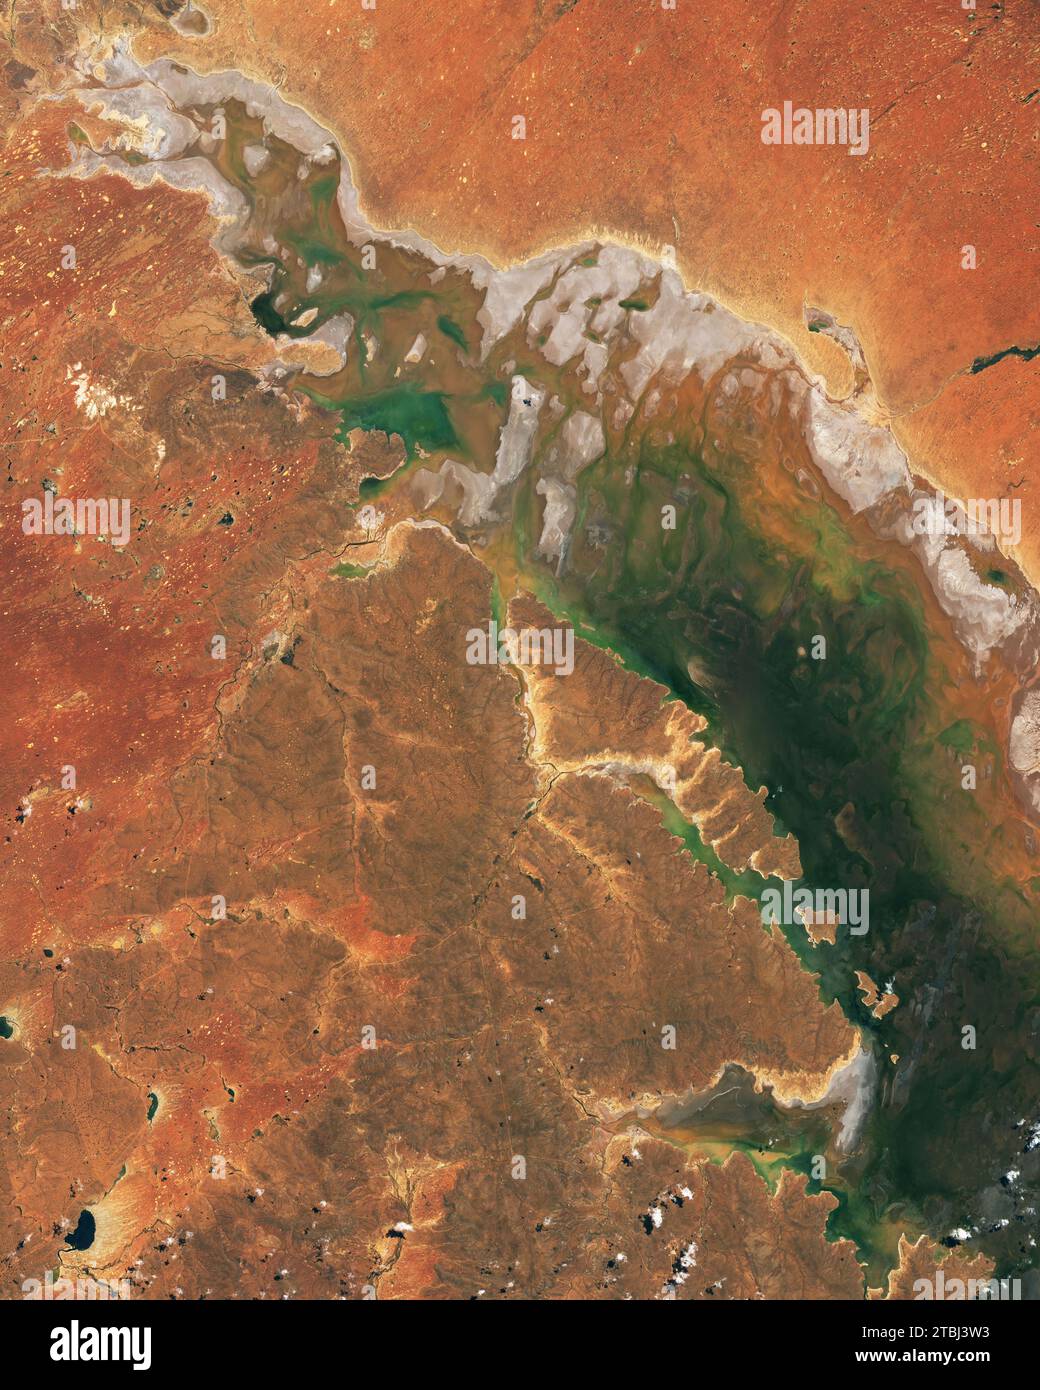 Satellite image of South Australia's Lake Torrens when water spanned much of the lakebed. Stock Photo